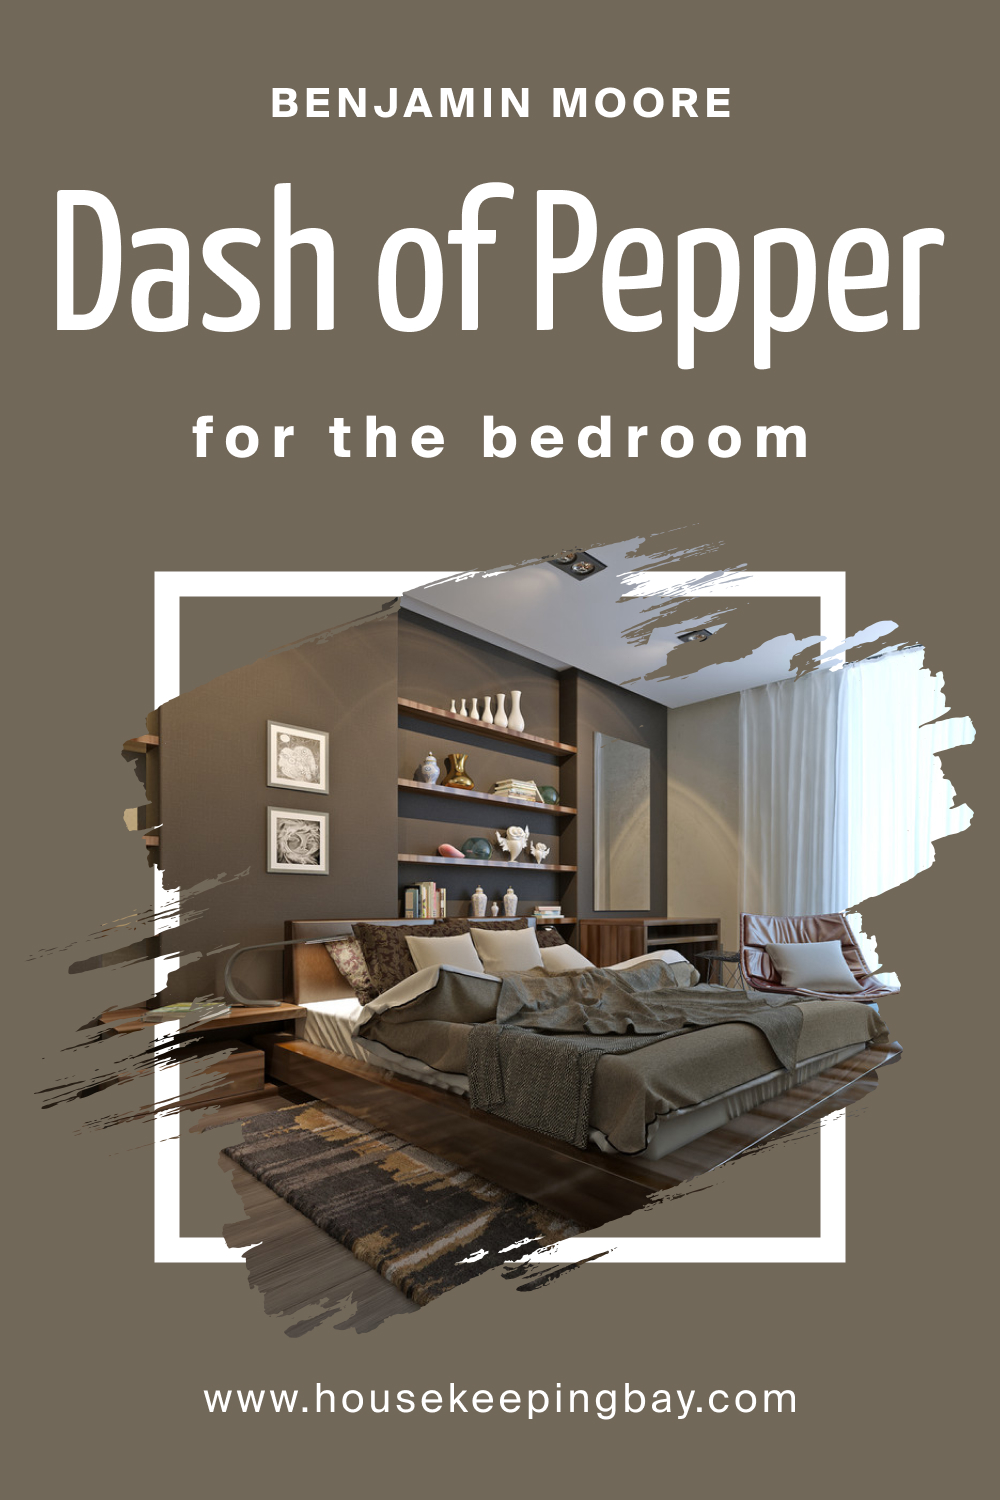 How to Use BM Dash of Pepper 1554 in the Bedroom?